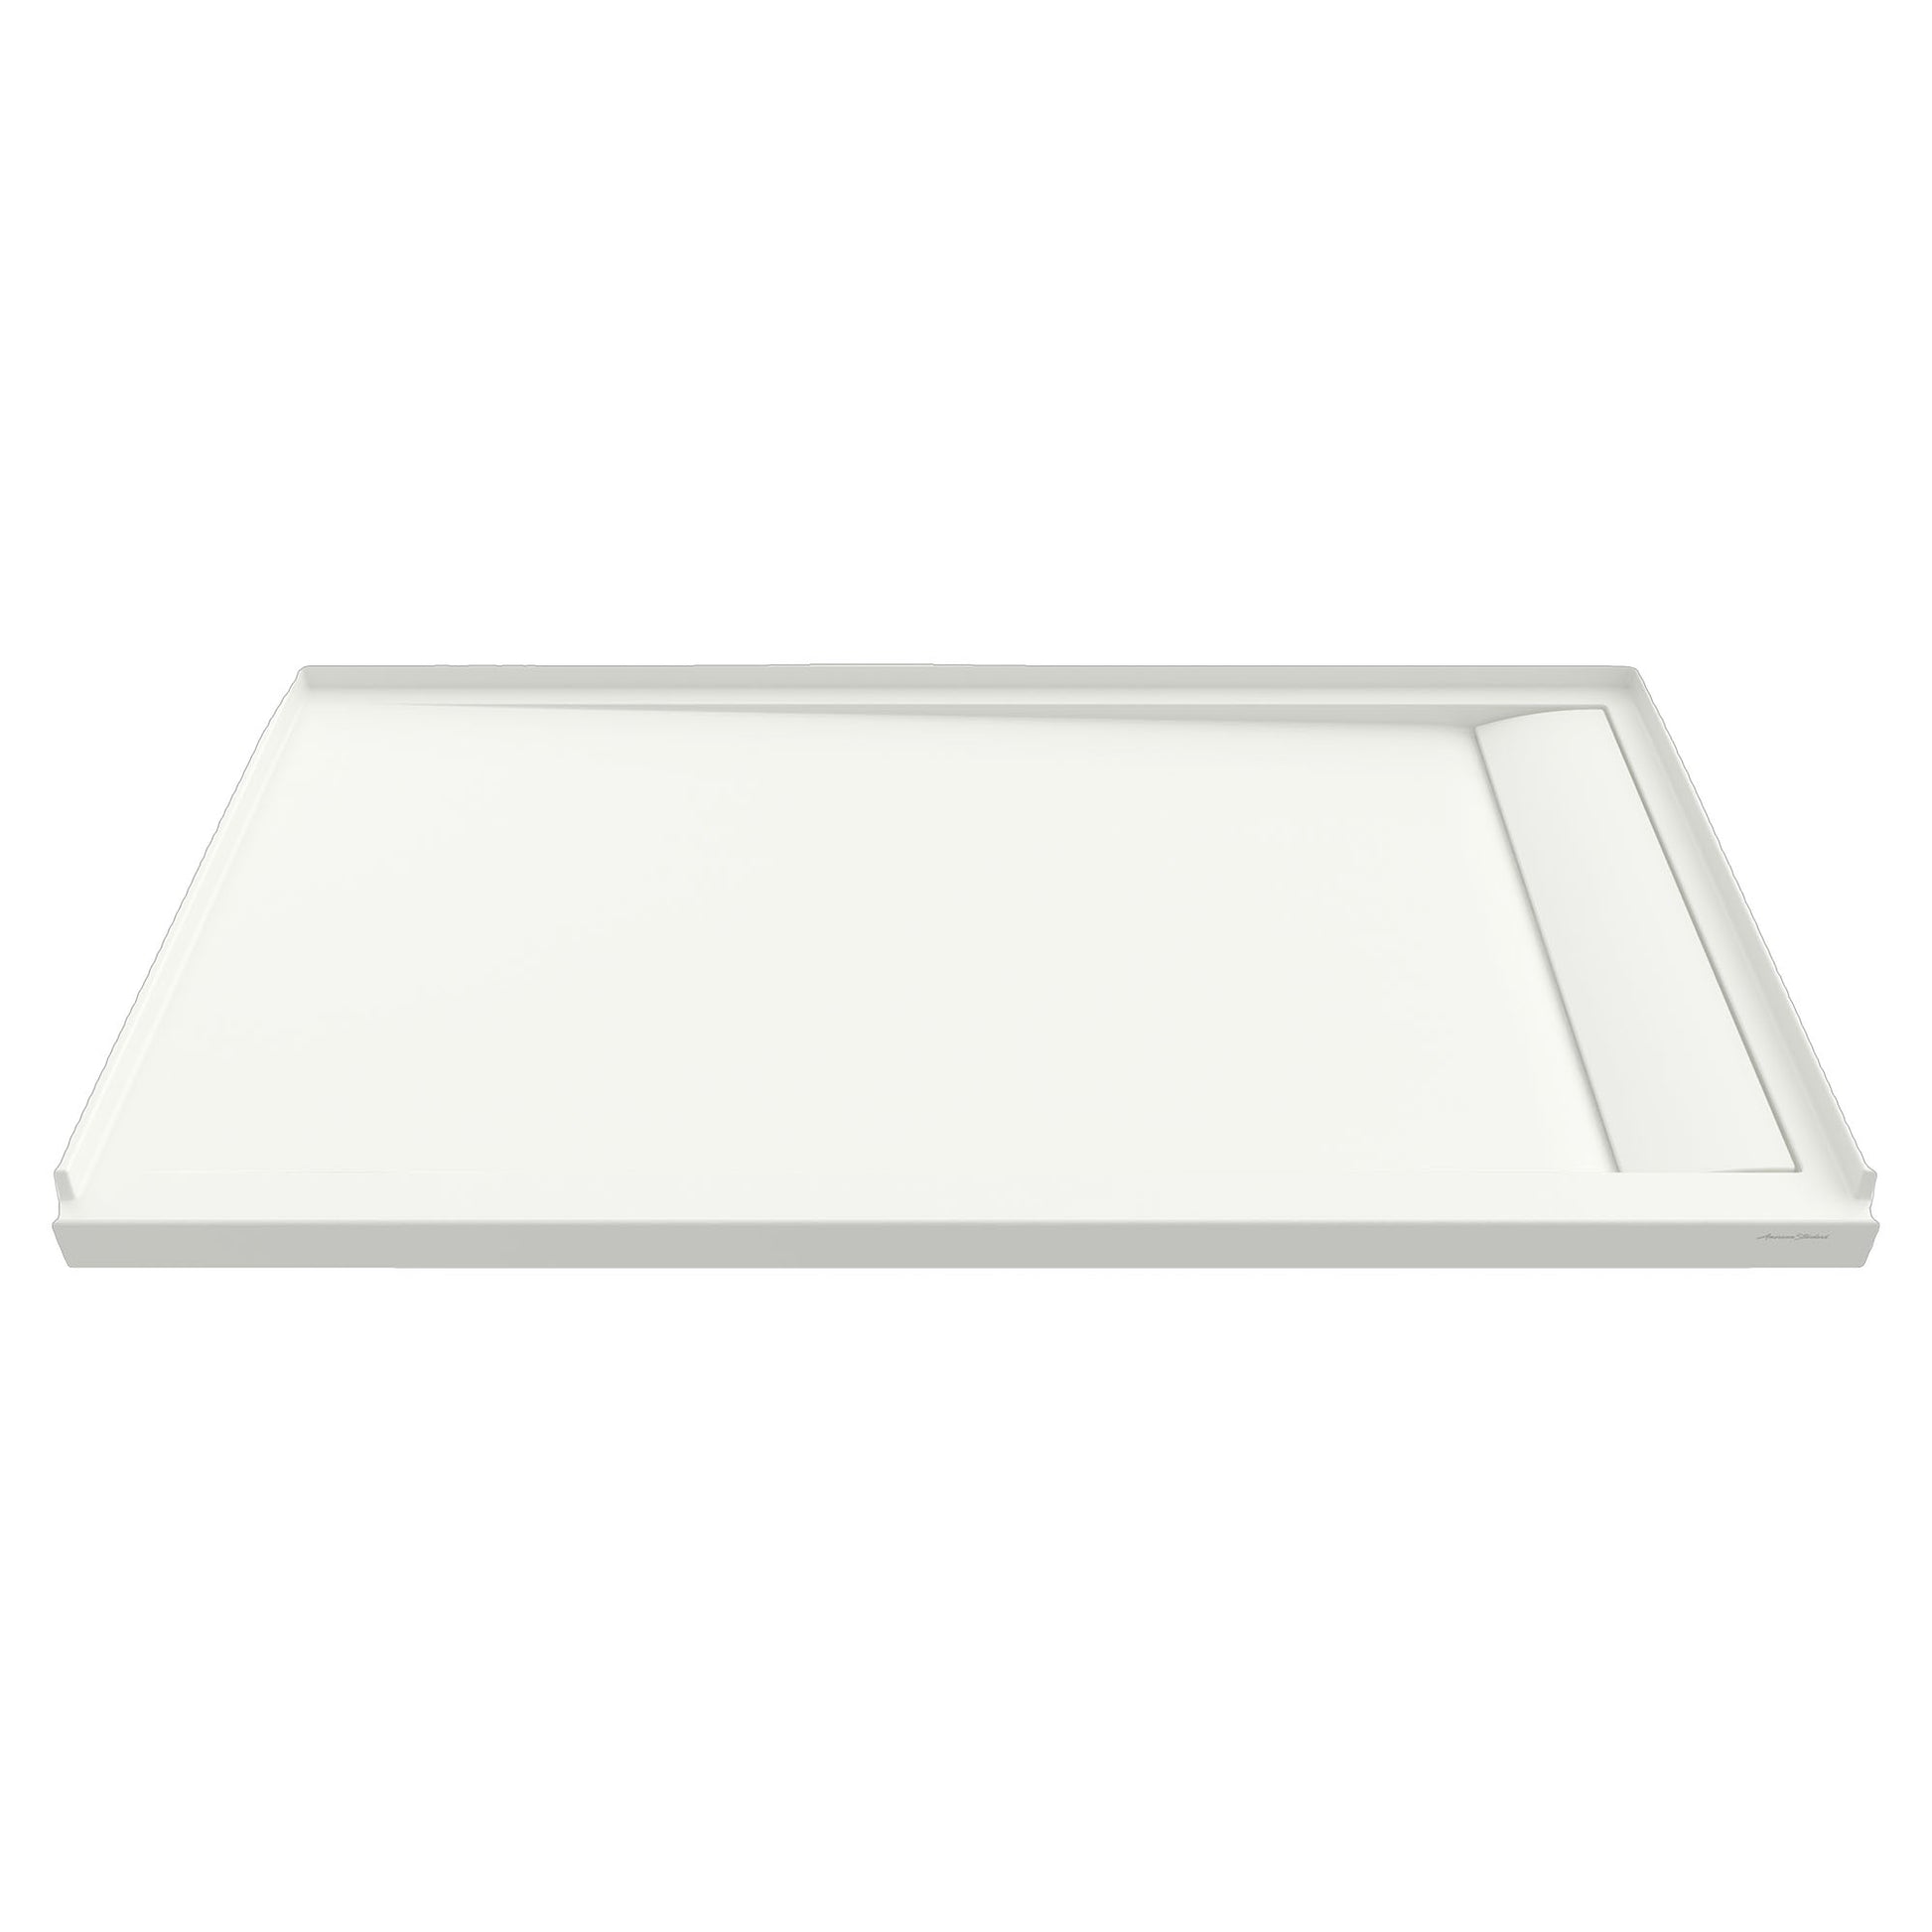 AMERICAN-STANDARD 6036SM-RHOL.218, Townsend 60 x 36-Inch Single Threshold Shower Base With Right-Hand Outlet in Soft White